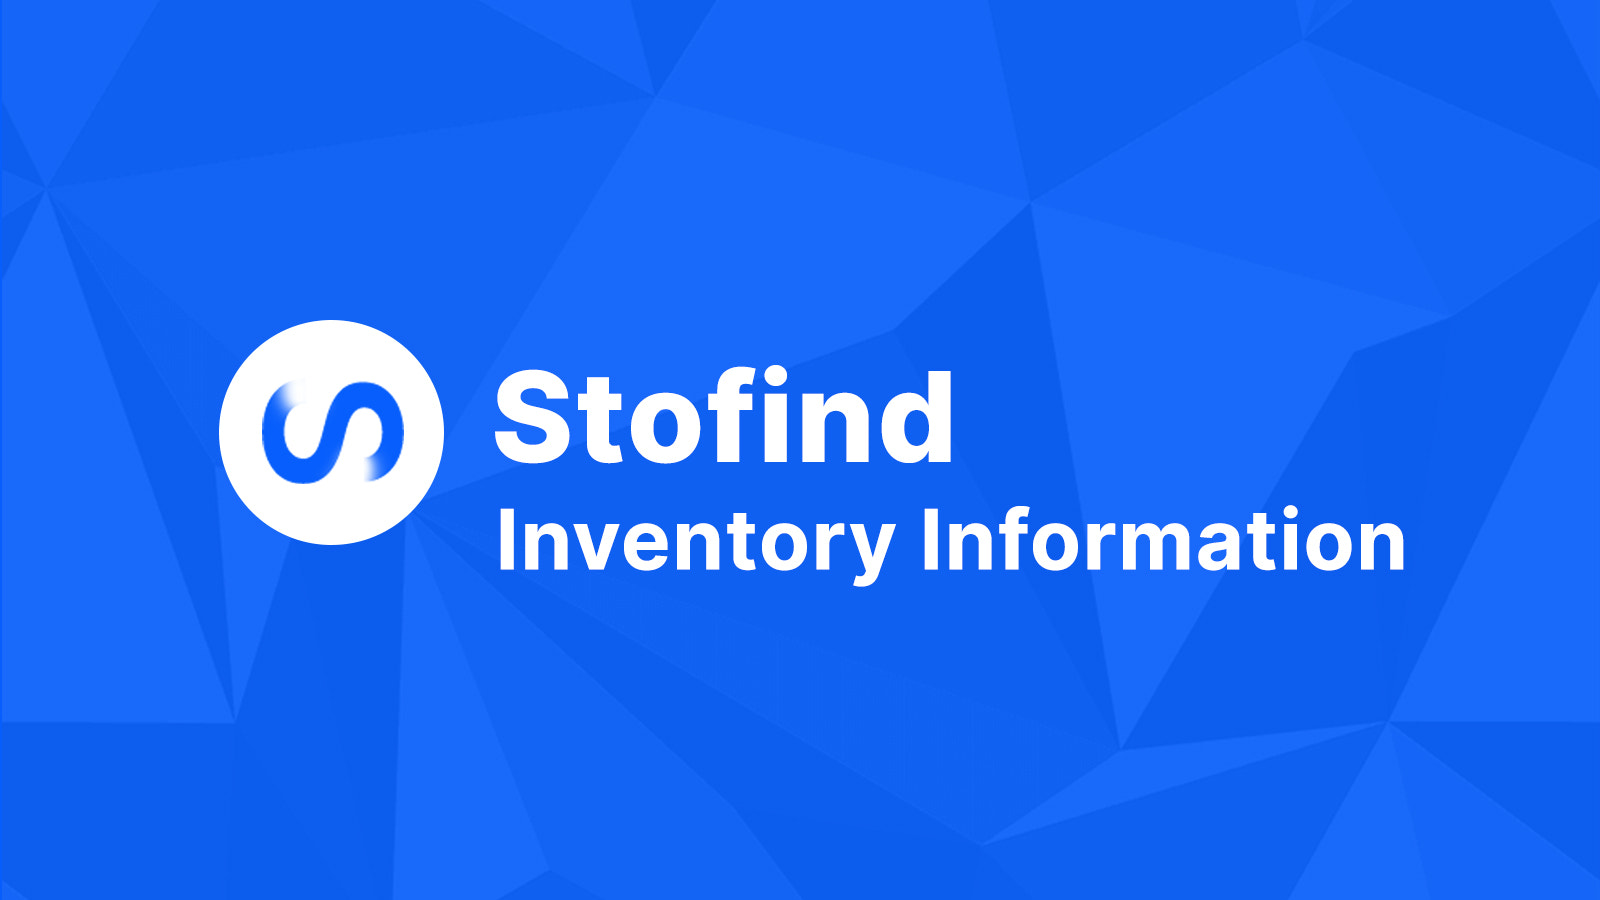 stofind - inventory information, stock availability